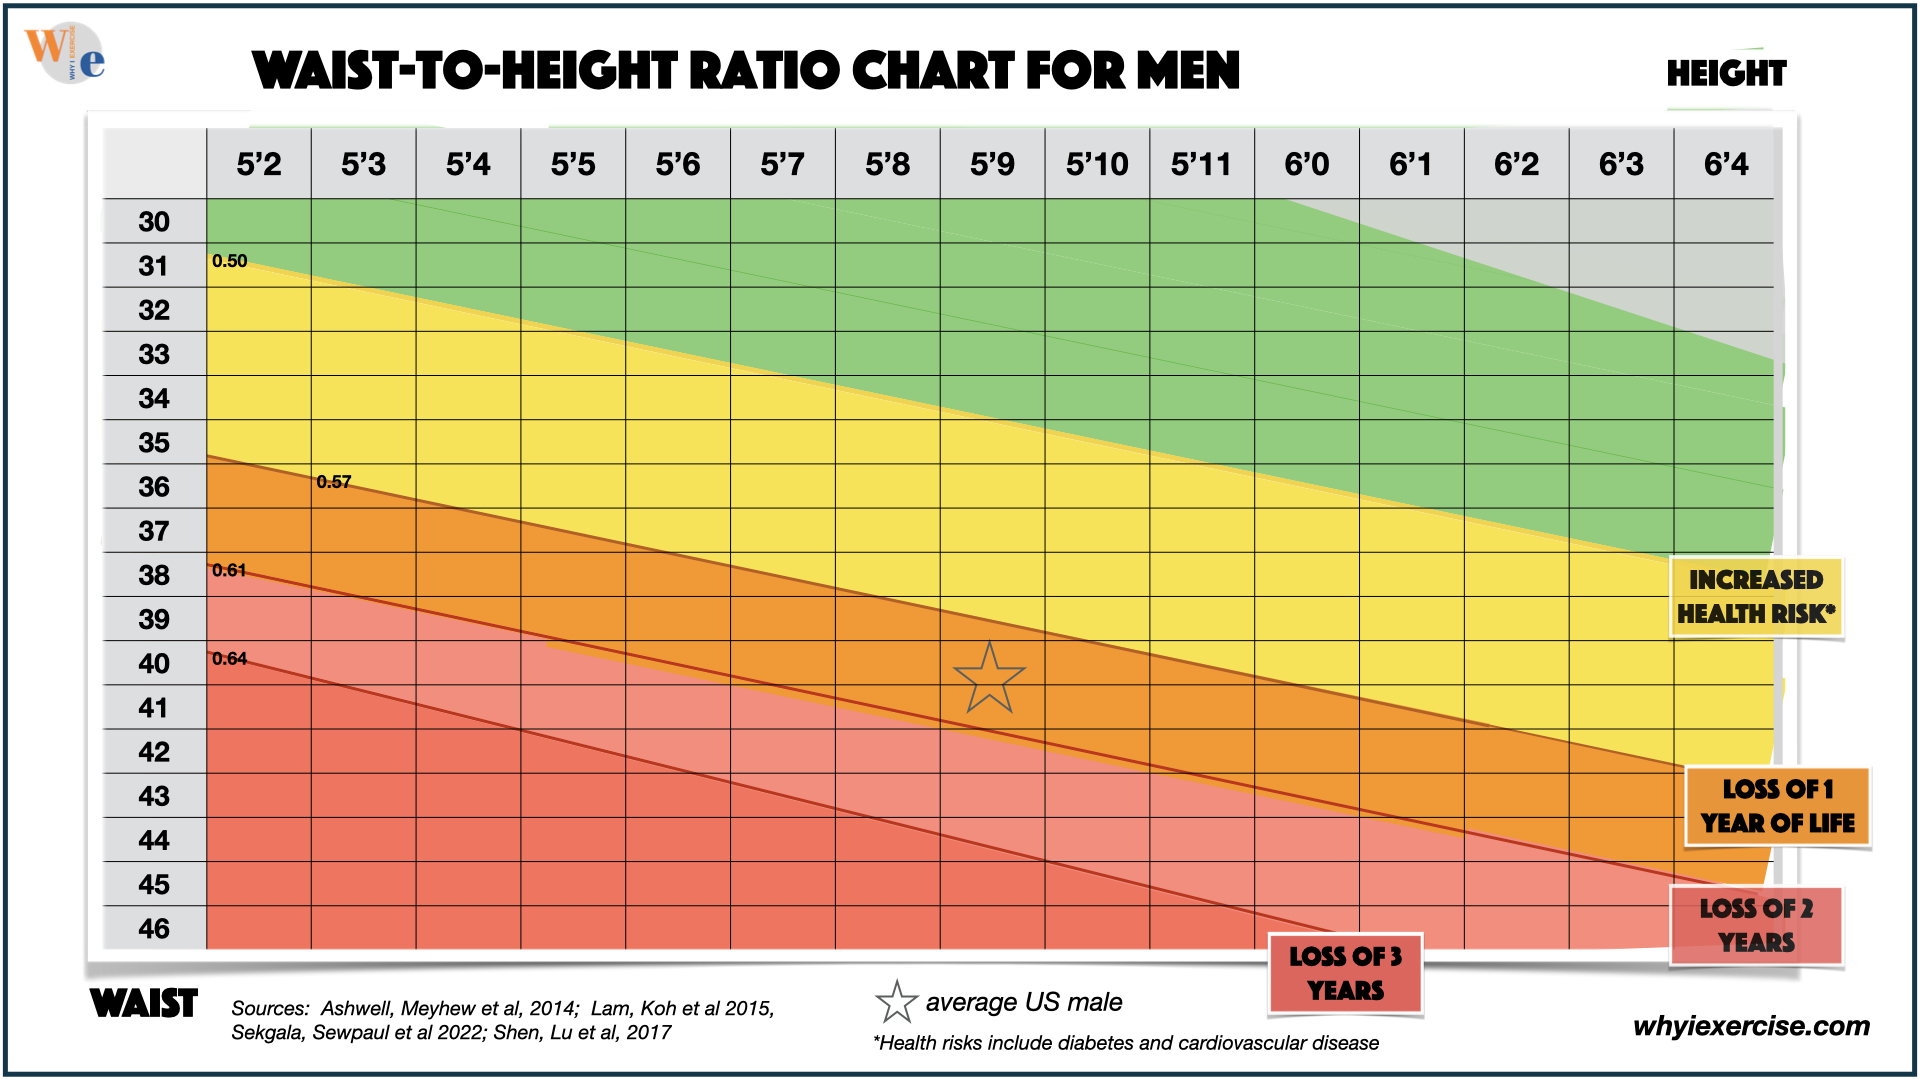 Waist-to-height ratio chart for men